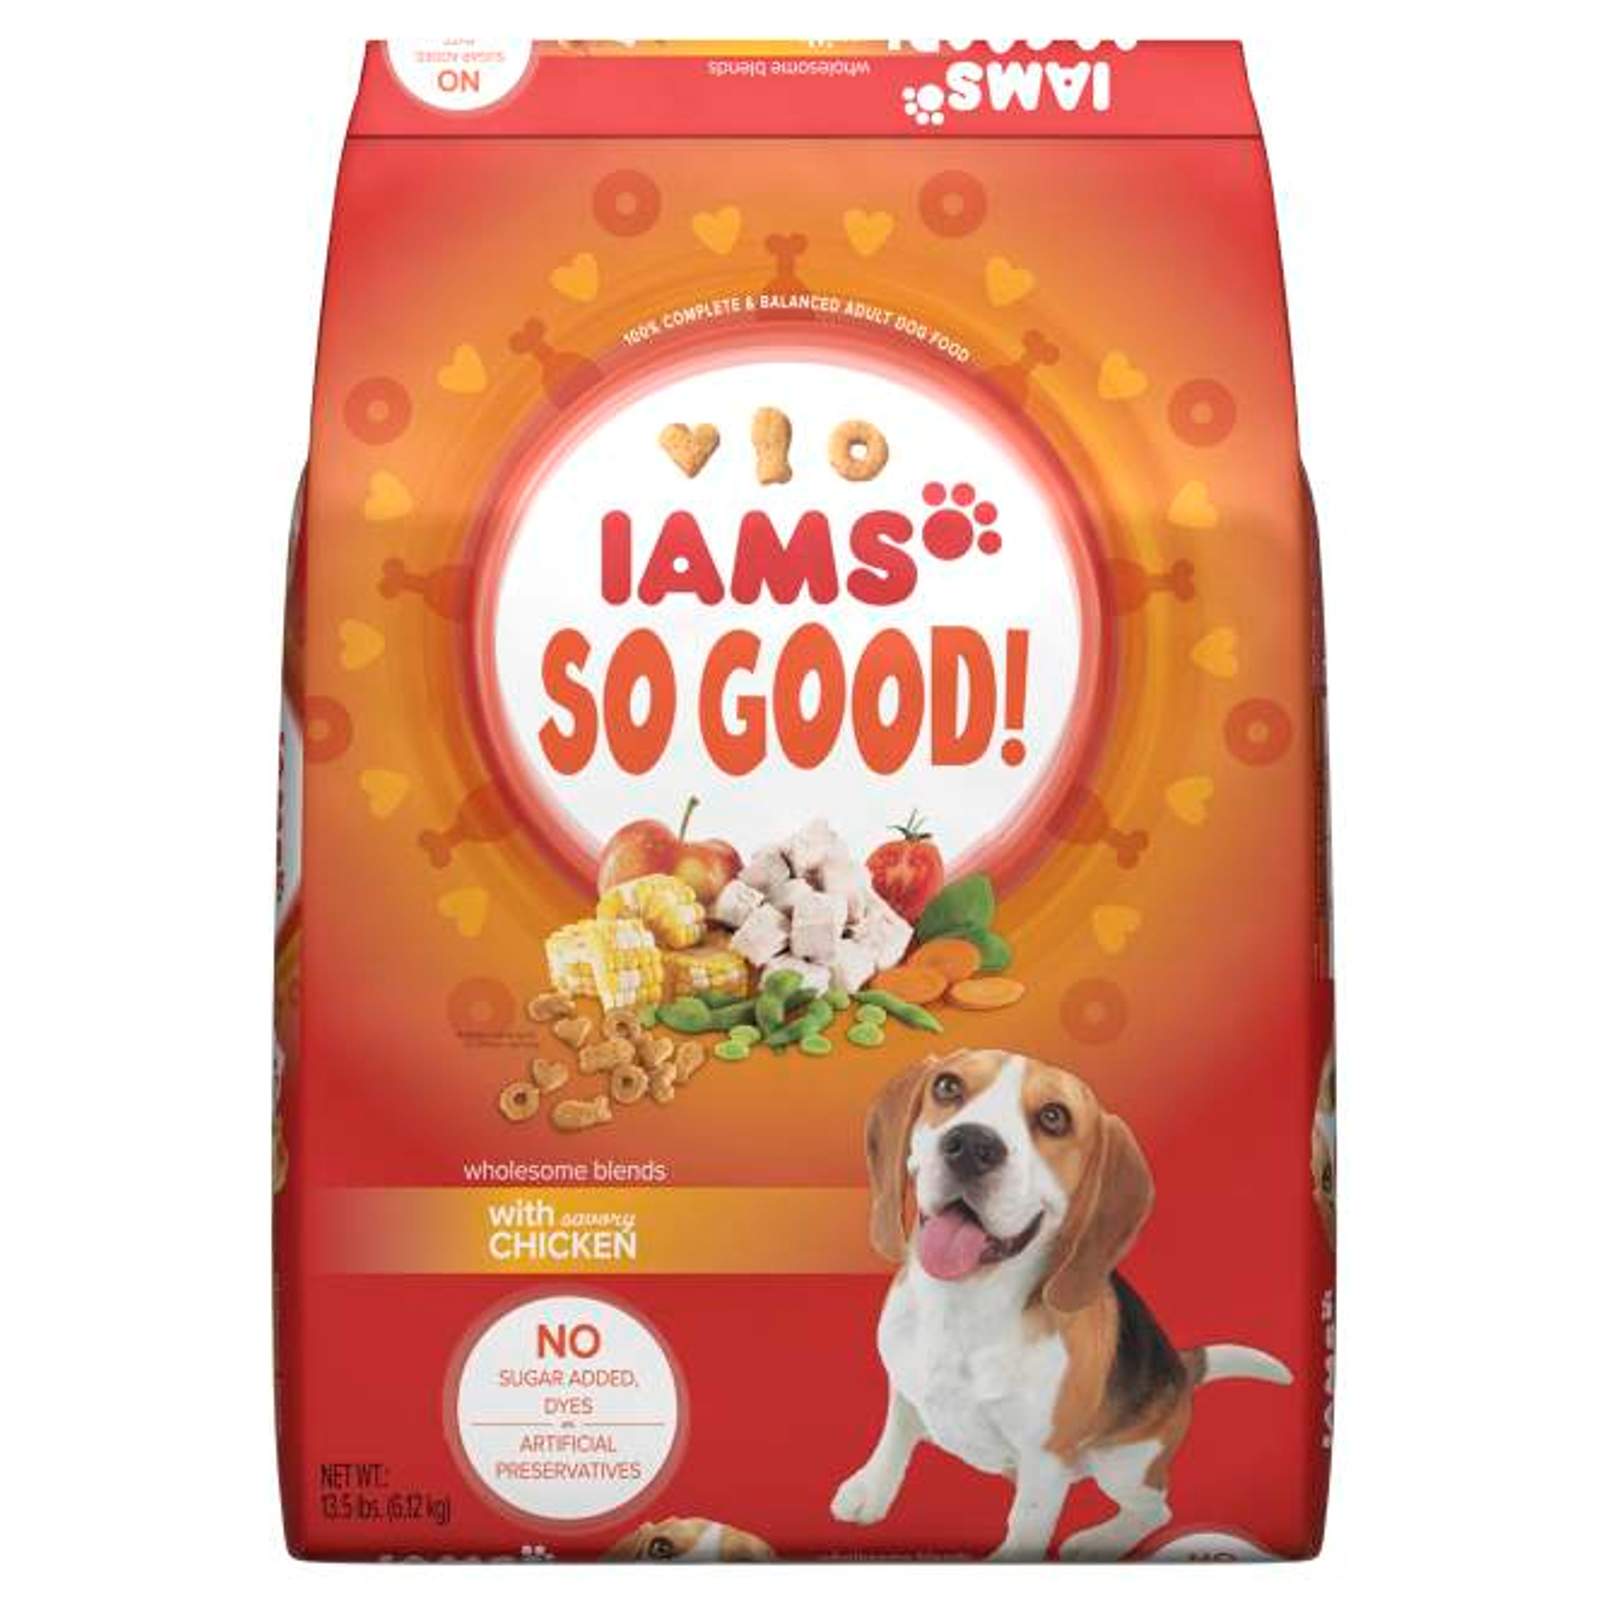 Iams So Good Wholesome Blends with Savory Chicken Adult Dog Food, 13.5 lbs